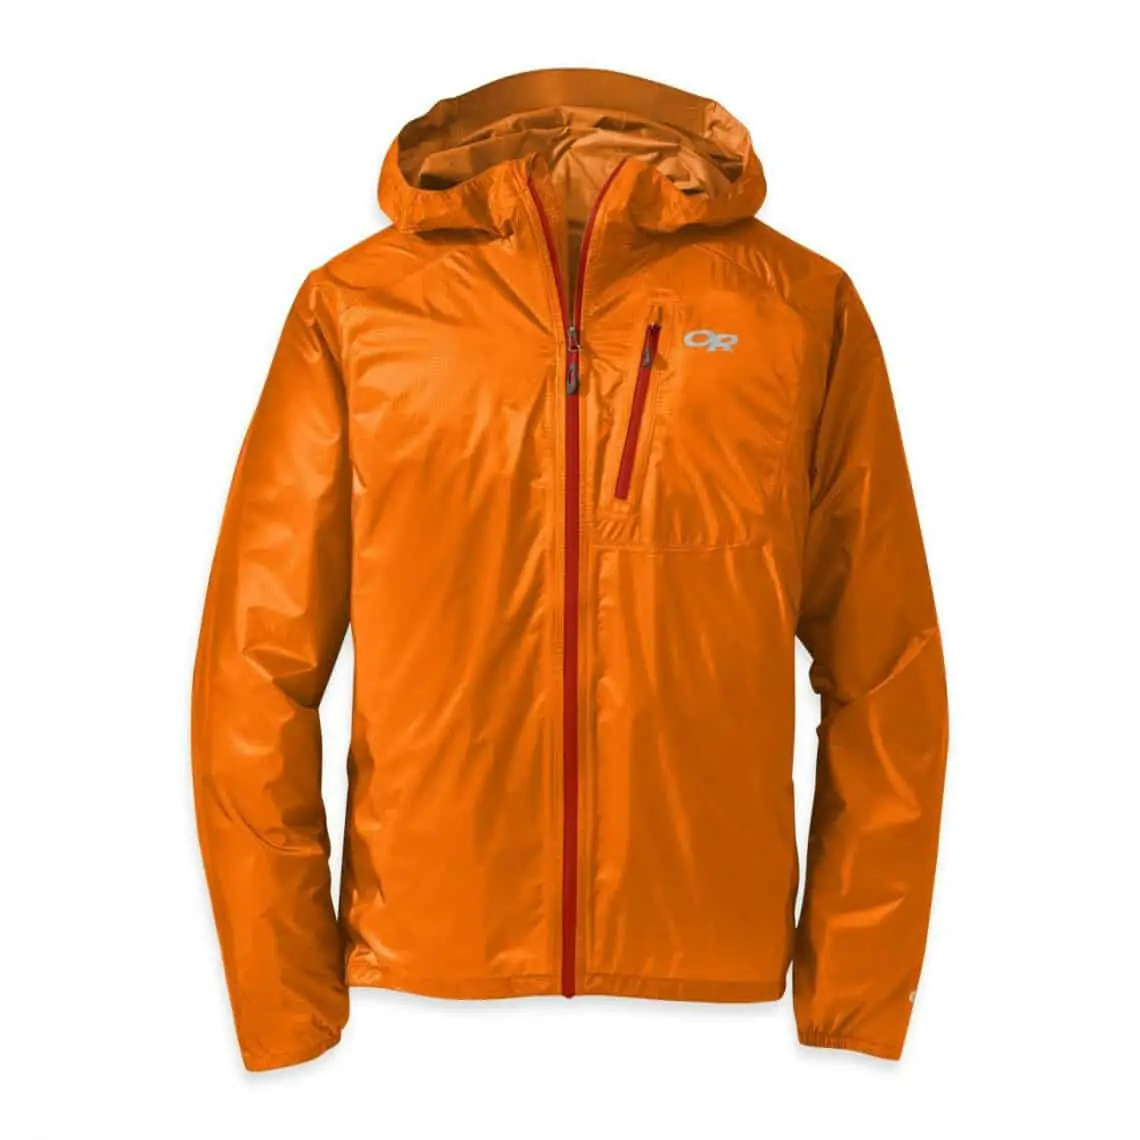 Best Packable Rain Jacket: Buying Guide and Expert’s Reviews